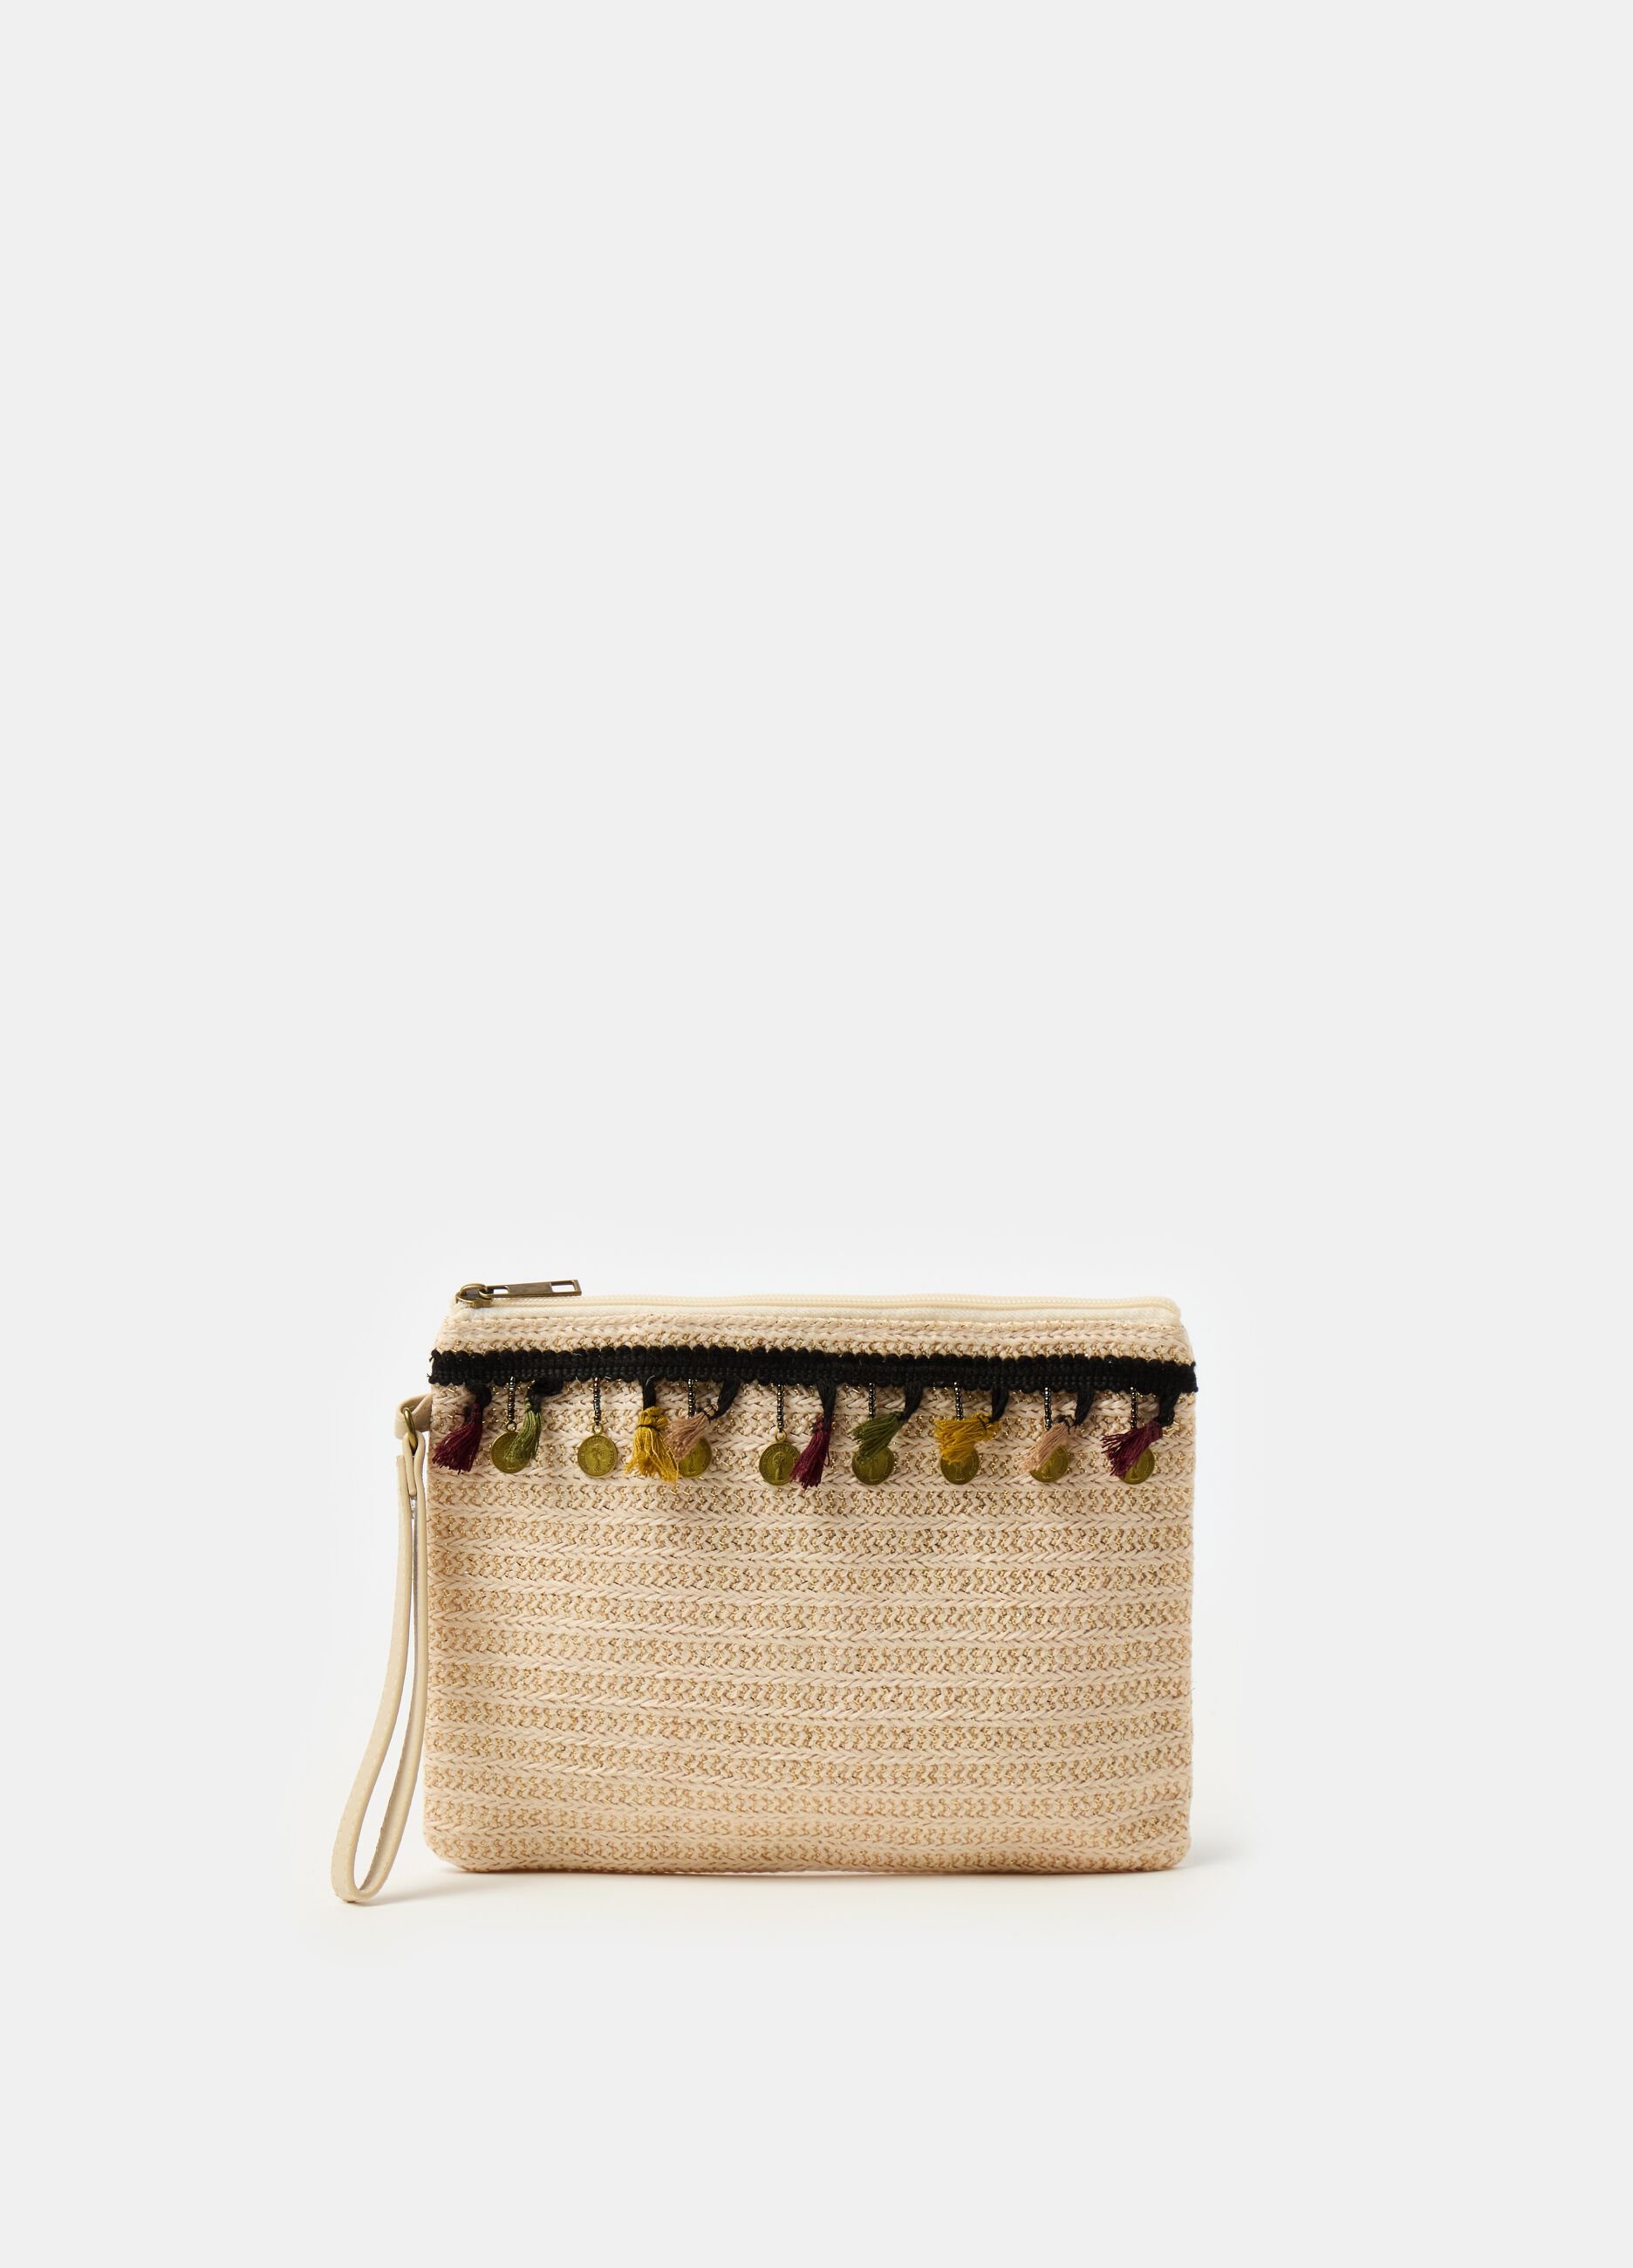 Clutch bag with crochet application and tassels